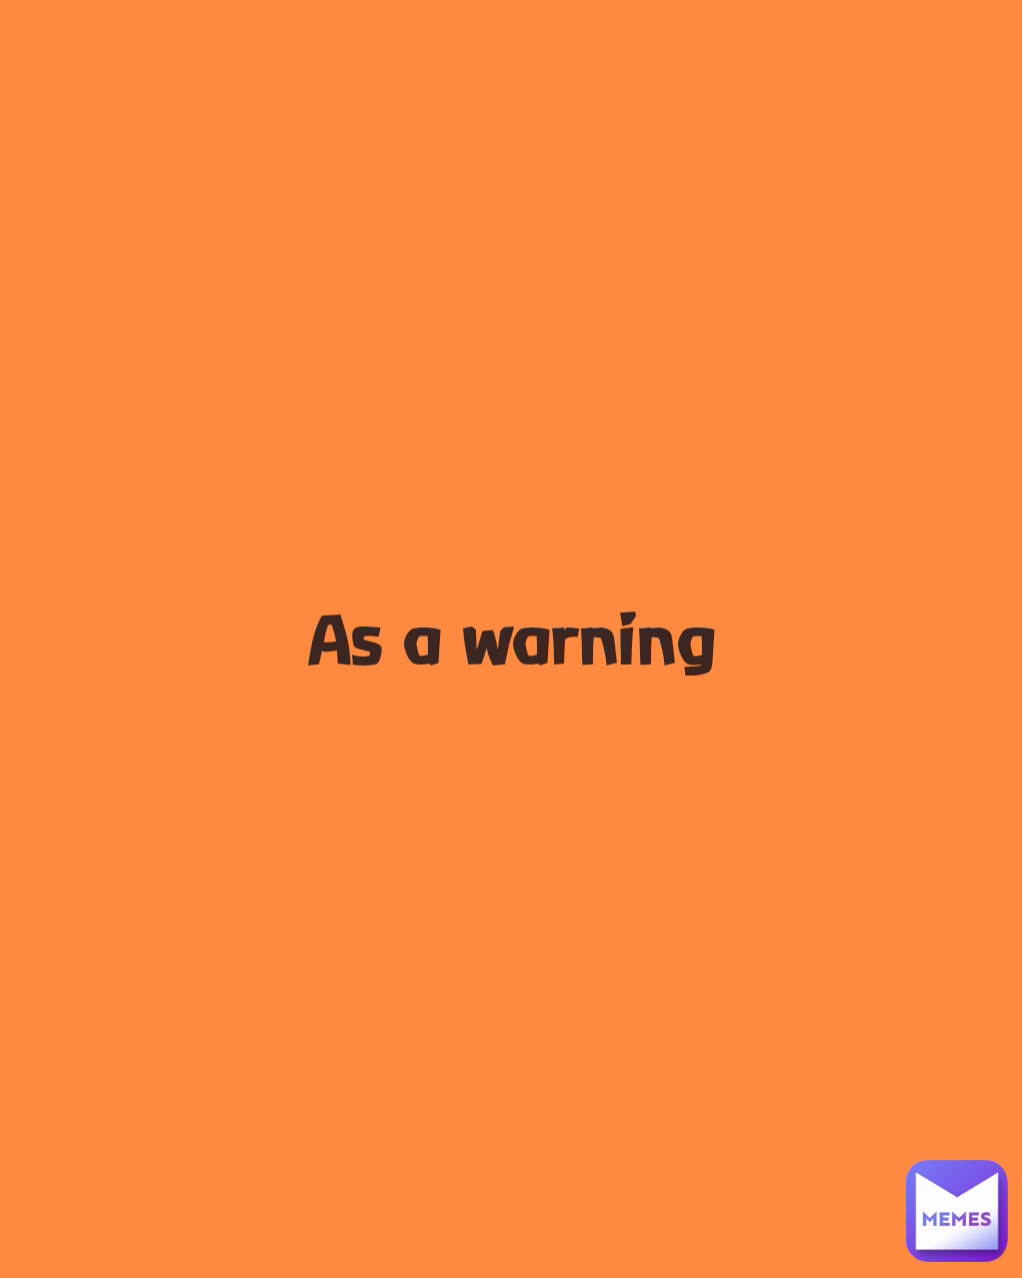 As a warning